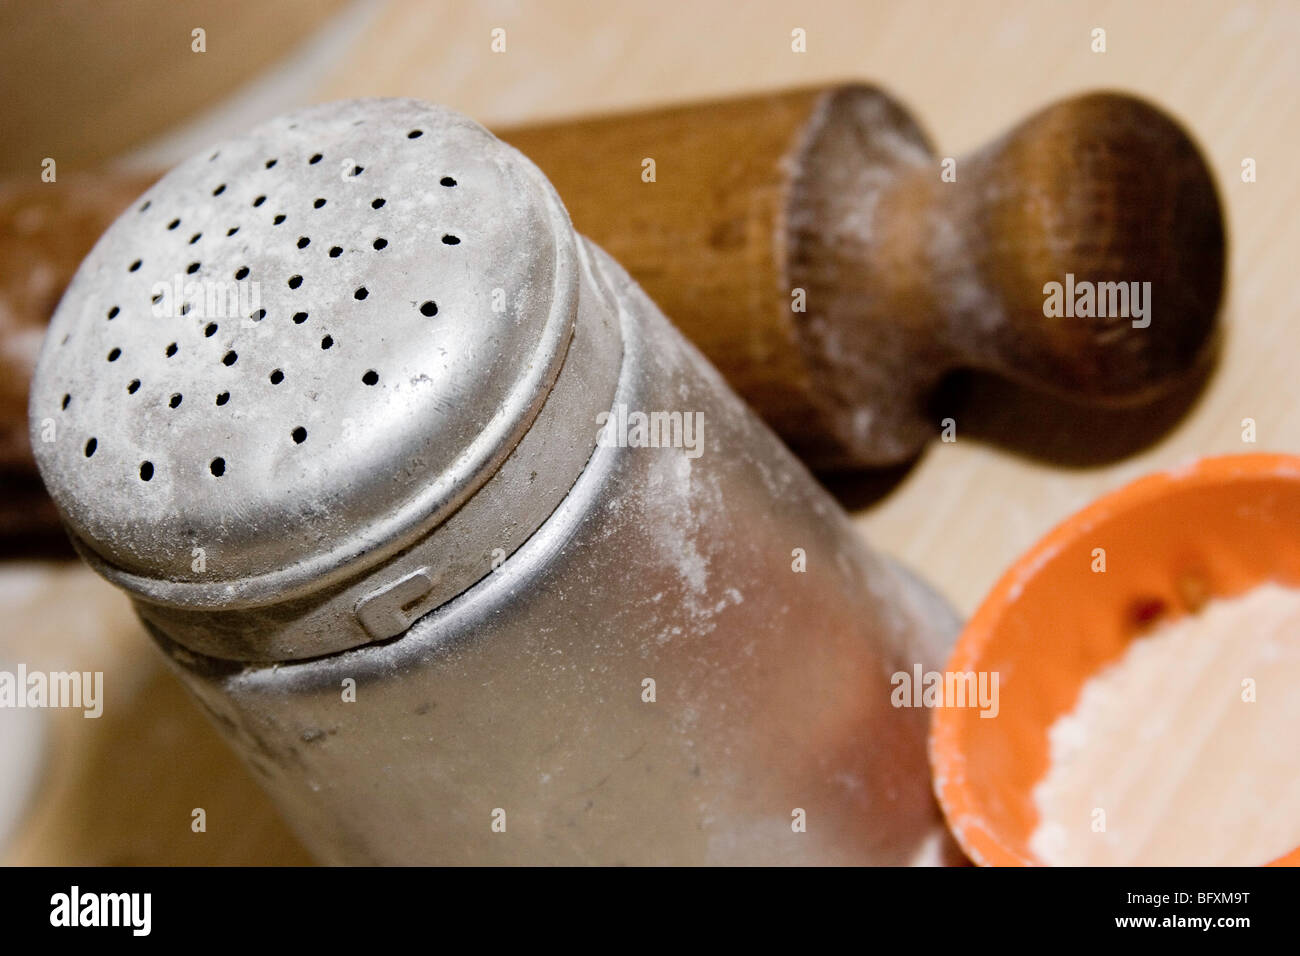 rolling pin, icing sugar shaker, pastry cutter Stock Photo